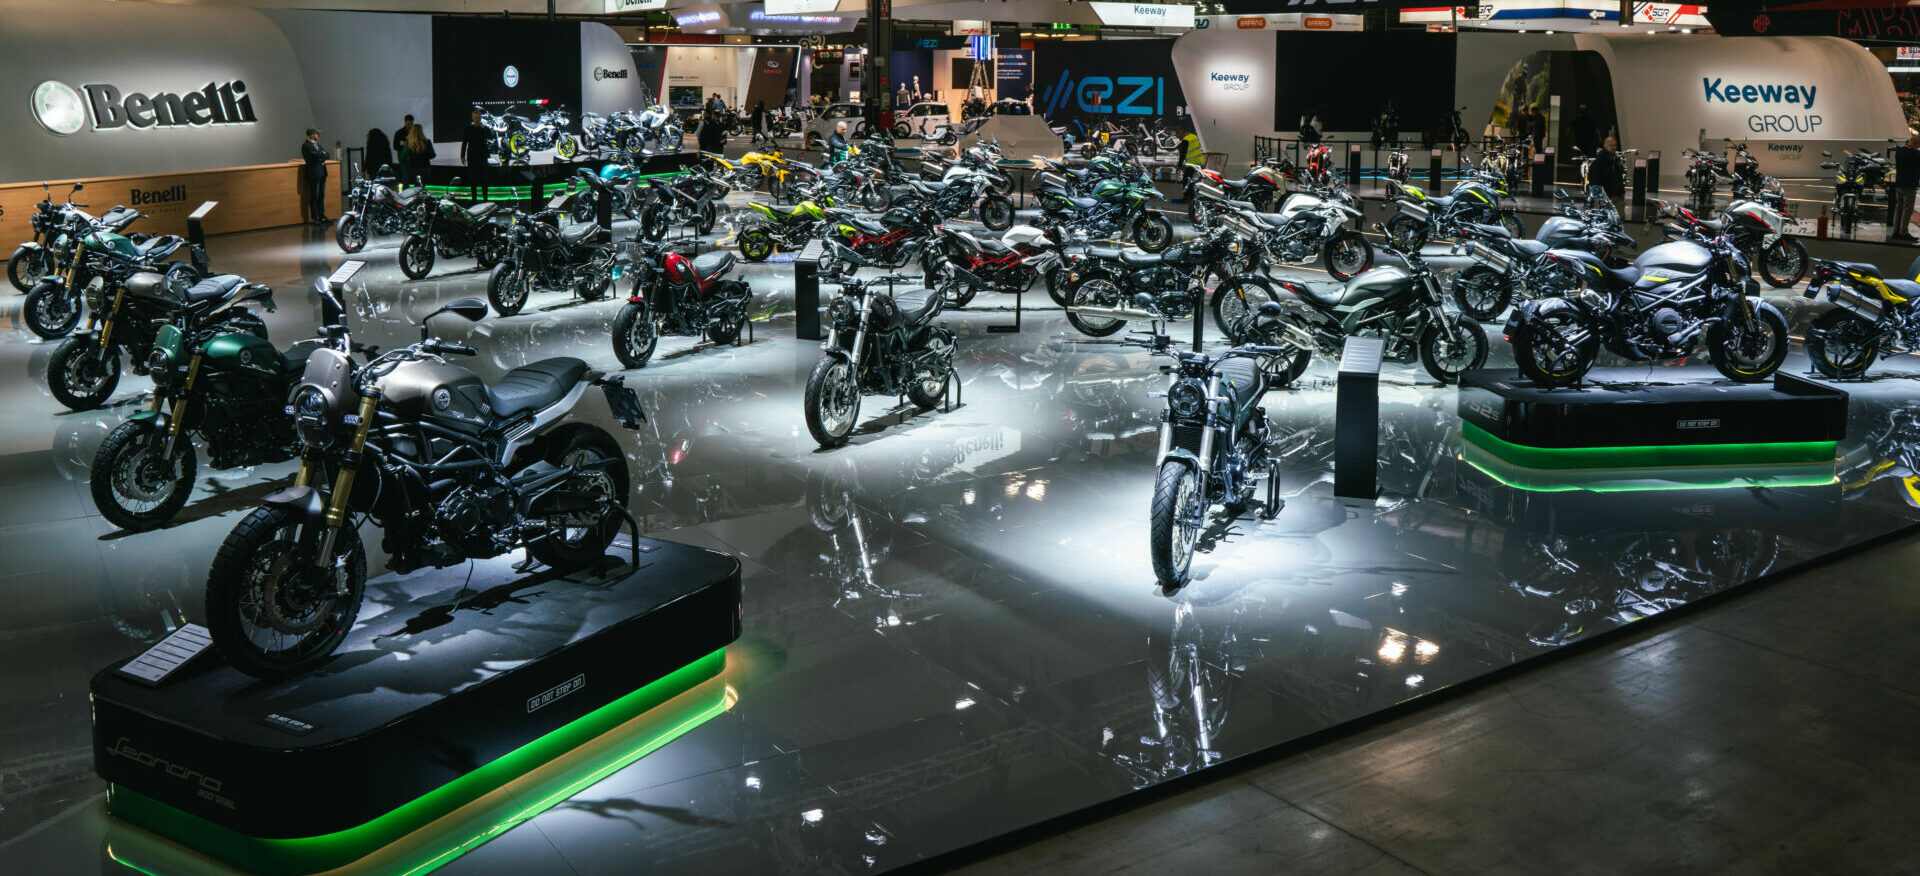 The Benelli/Keeway display area at the EICMA Show in Milan, Italy. Photo courtesy Keeway America.